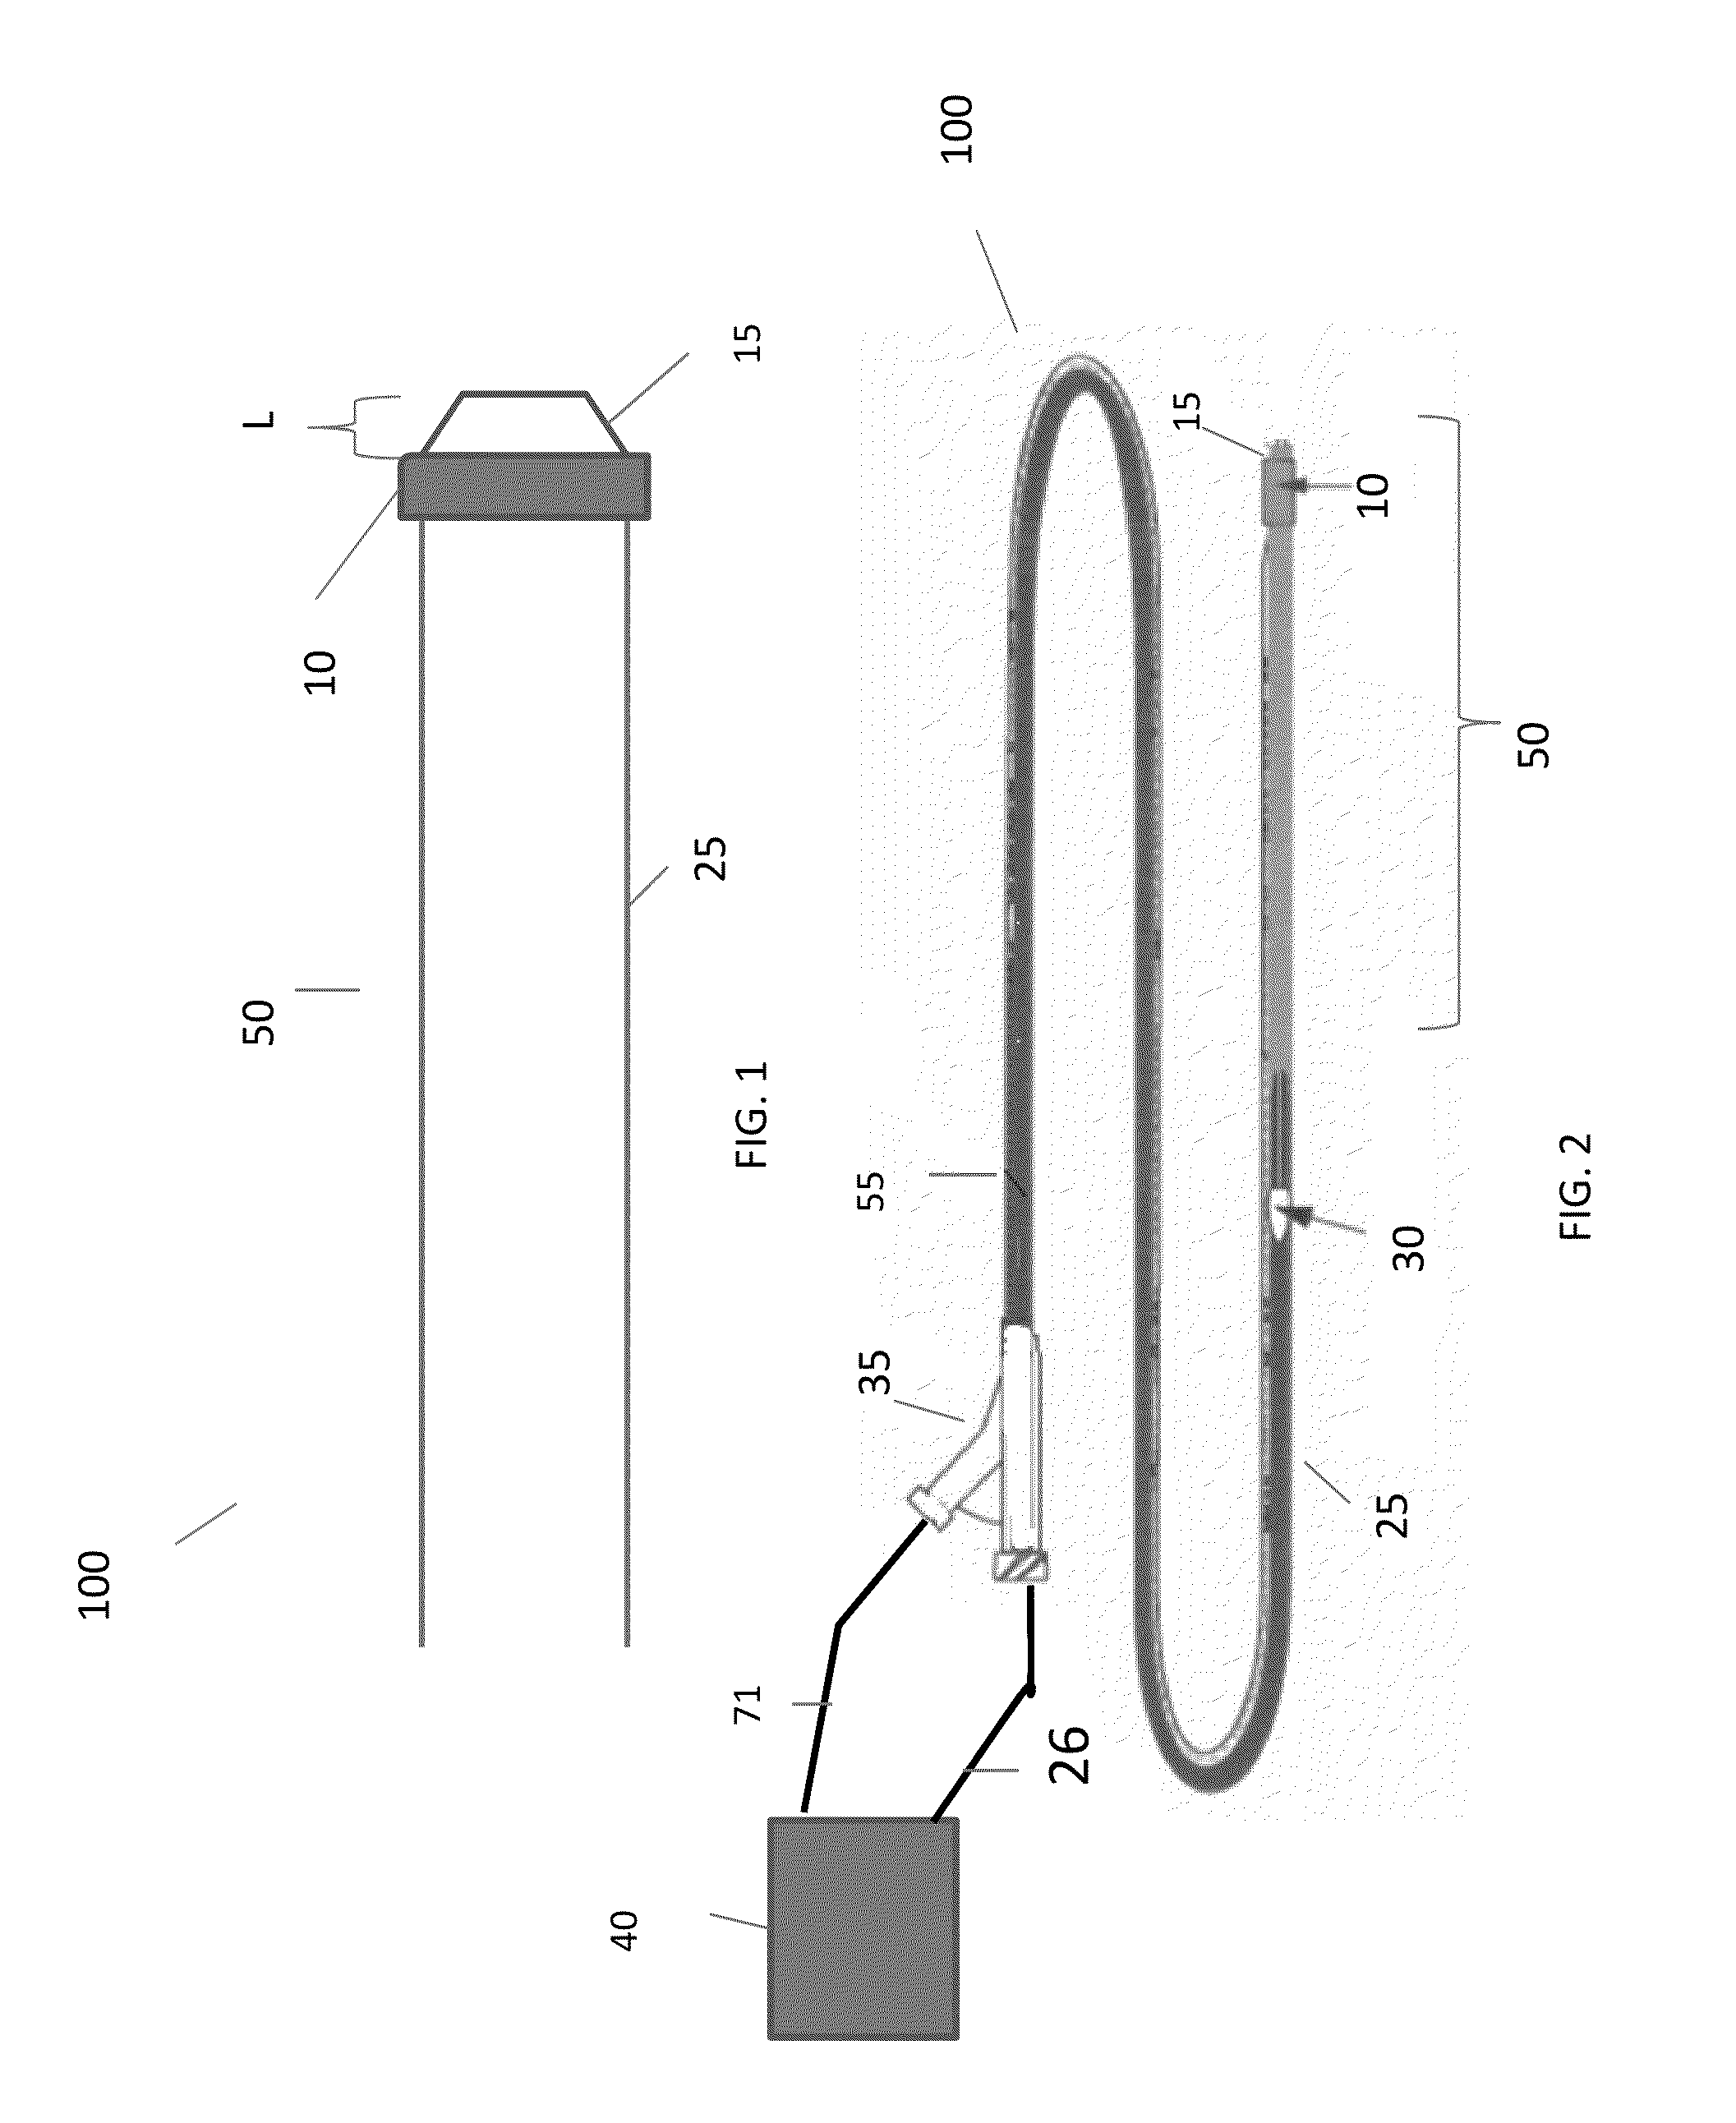 Implant delivery system and implants